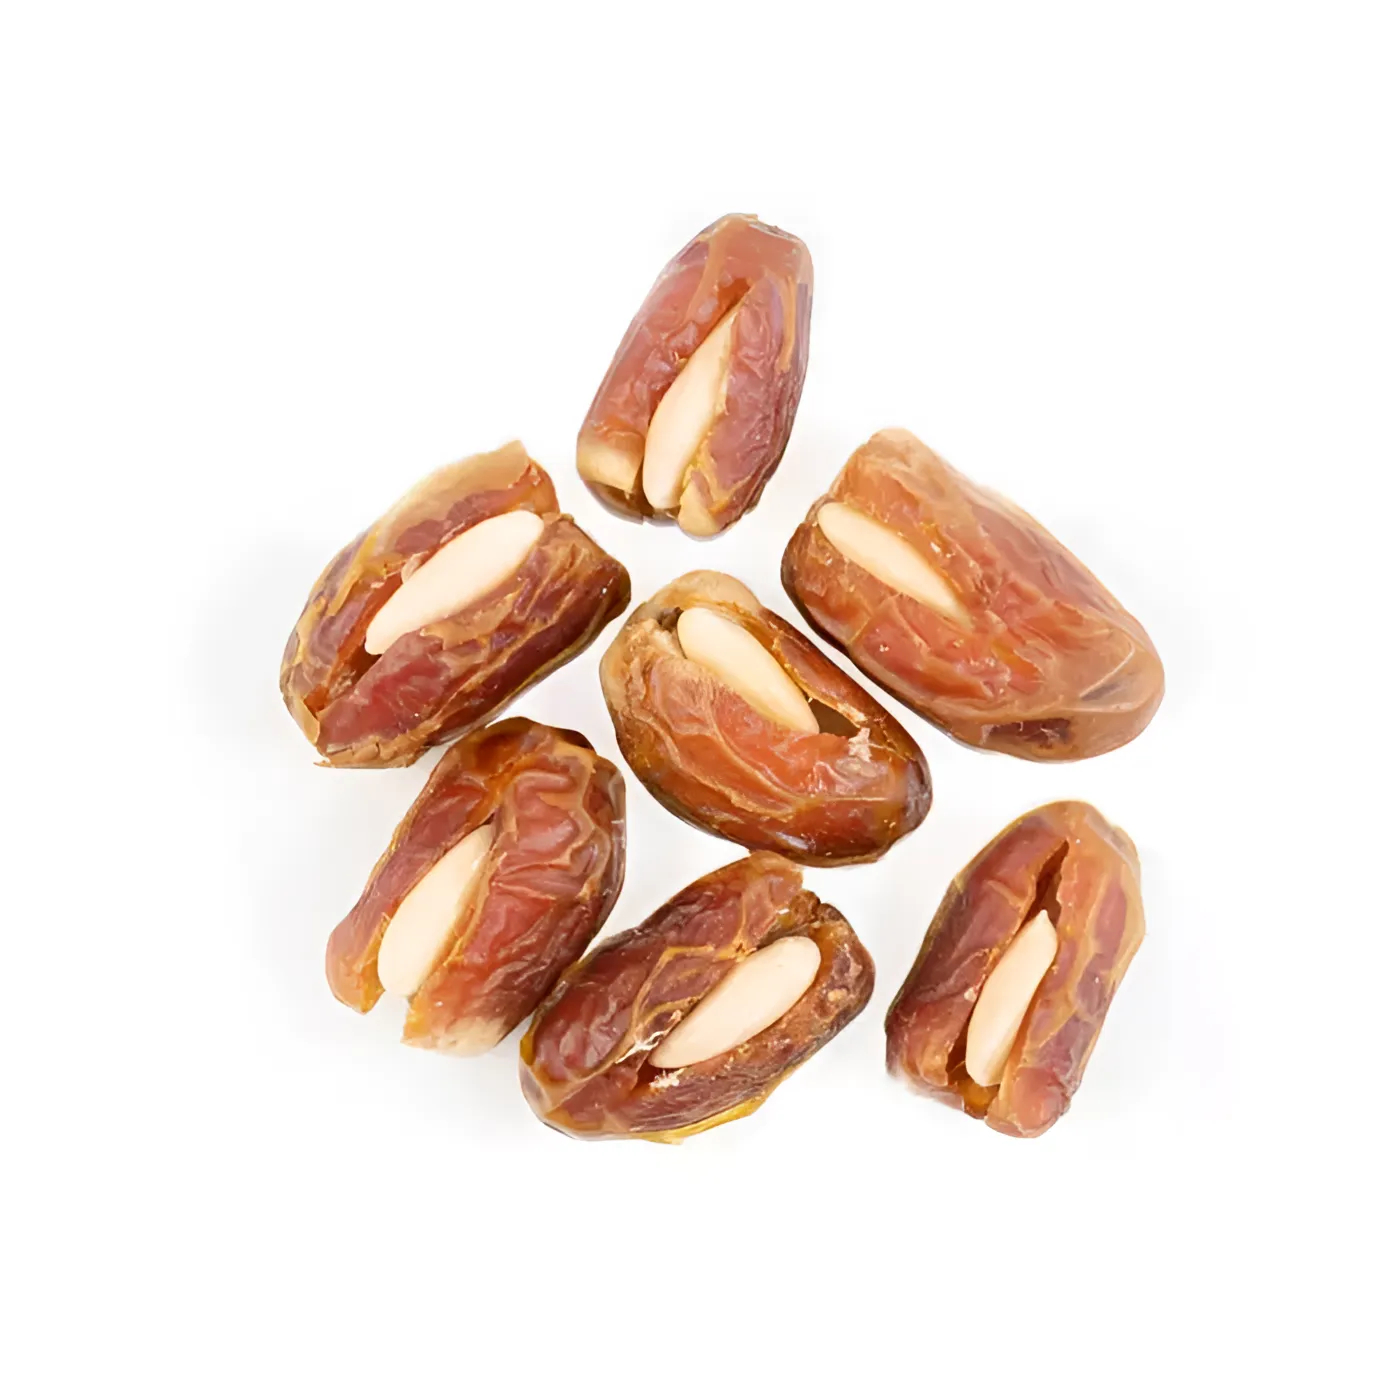 DATES SAGAI WITH ALMONDS BLANCHED